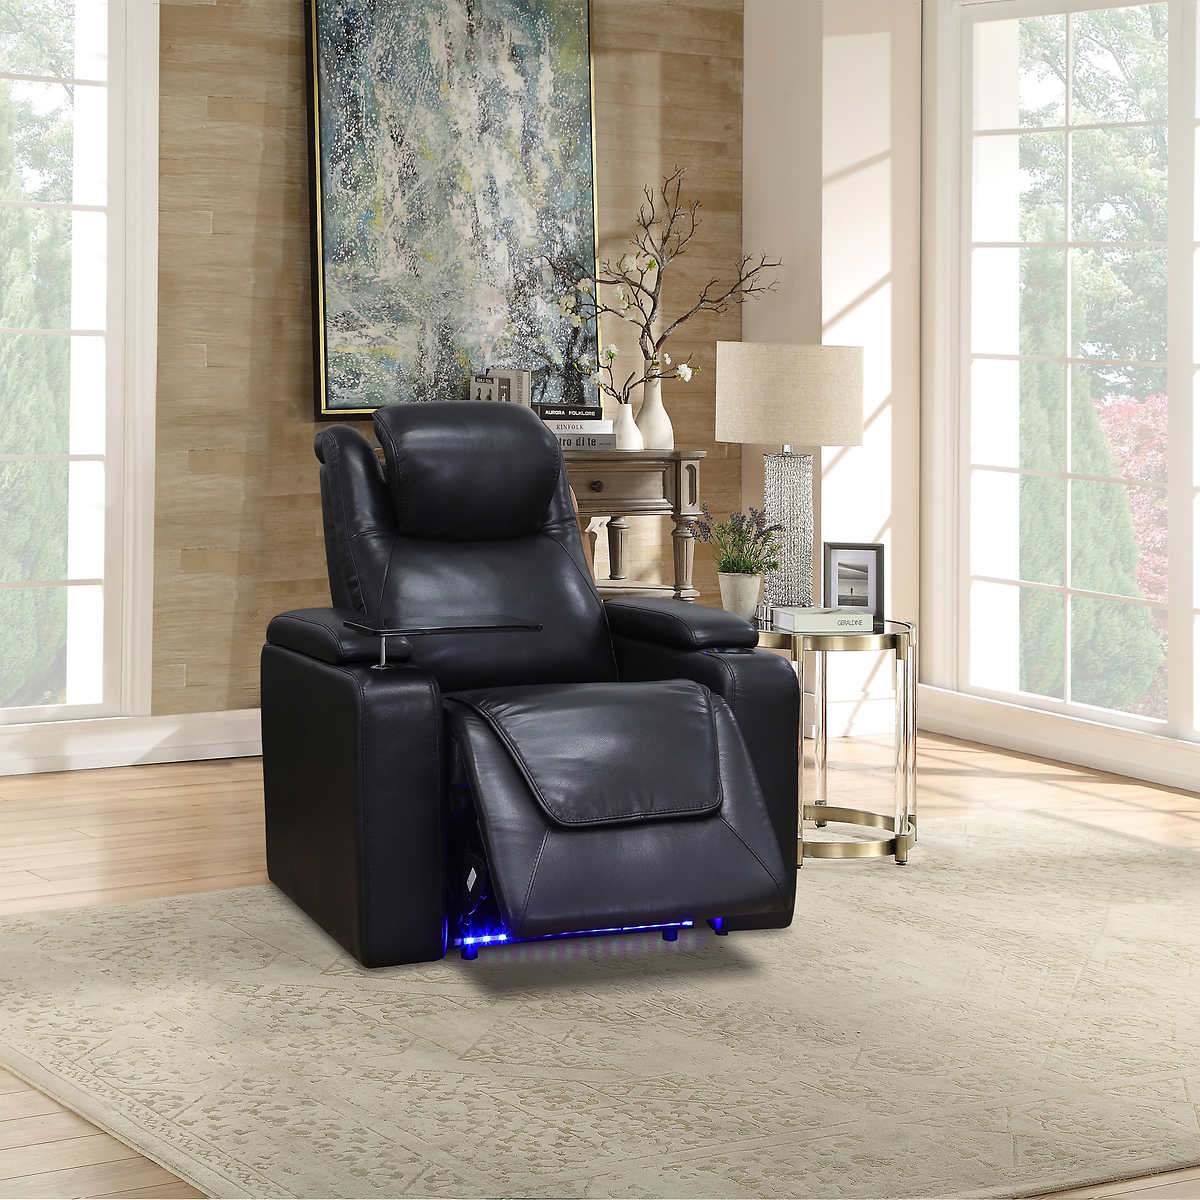 Kingsdown Top Grain Leather Home Theatre Power Recliner, has small rip in the back